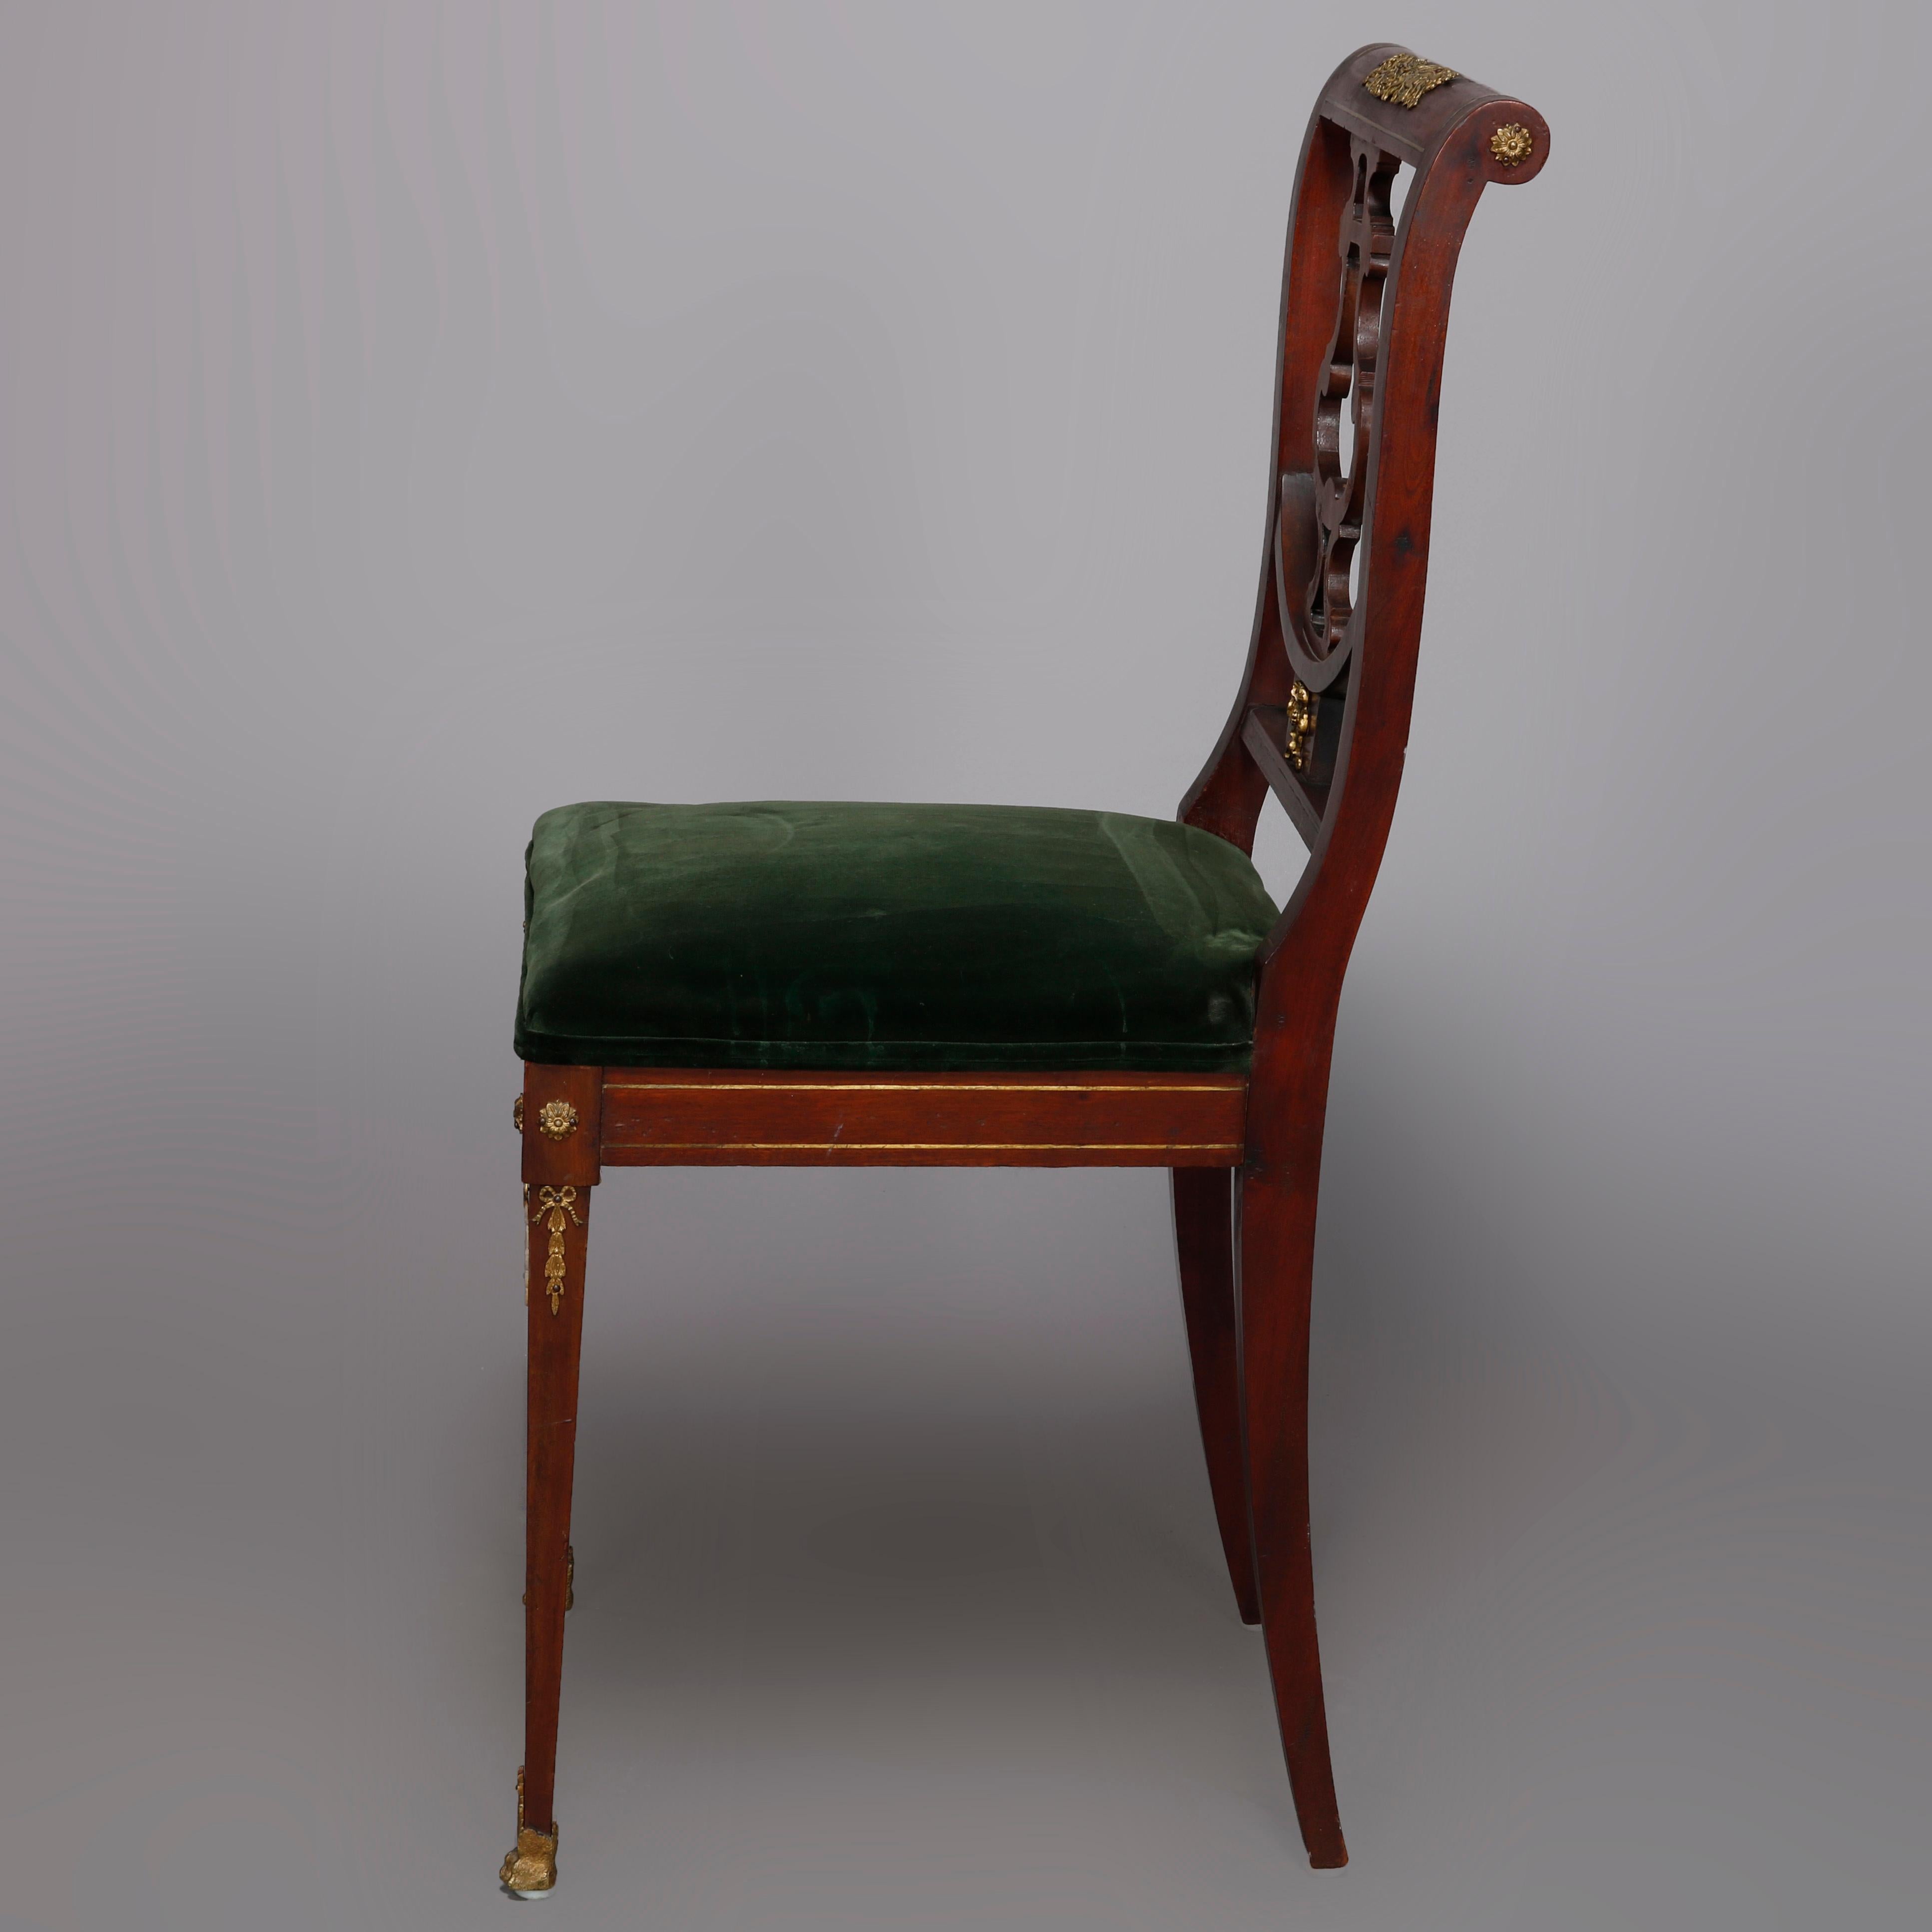 Upholstery Antique French Empire Mahogany Side chair with Ormolu Mounts 19th C For Sale